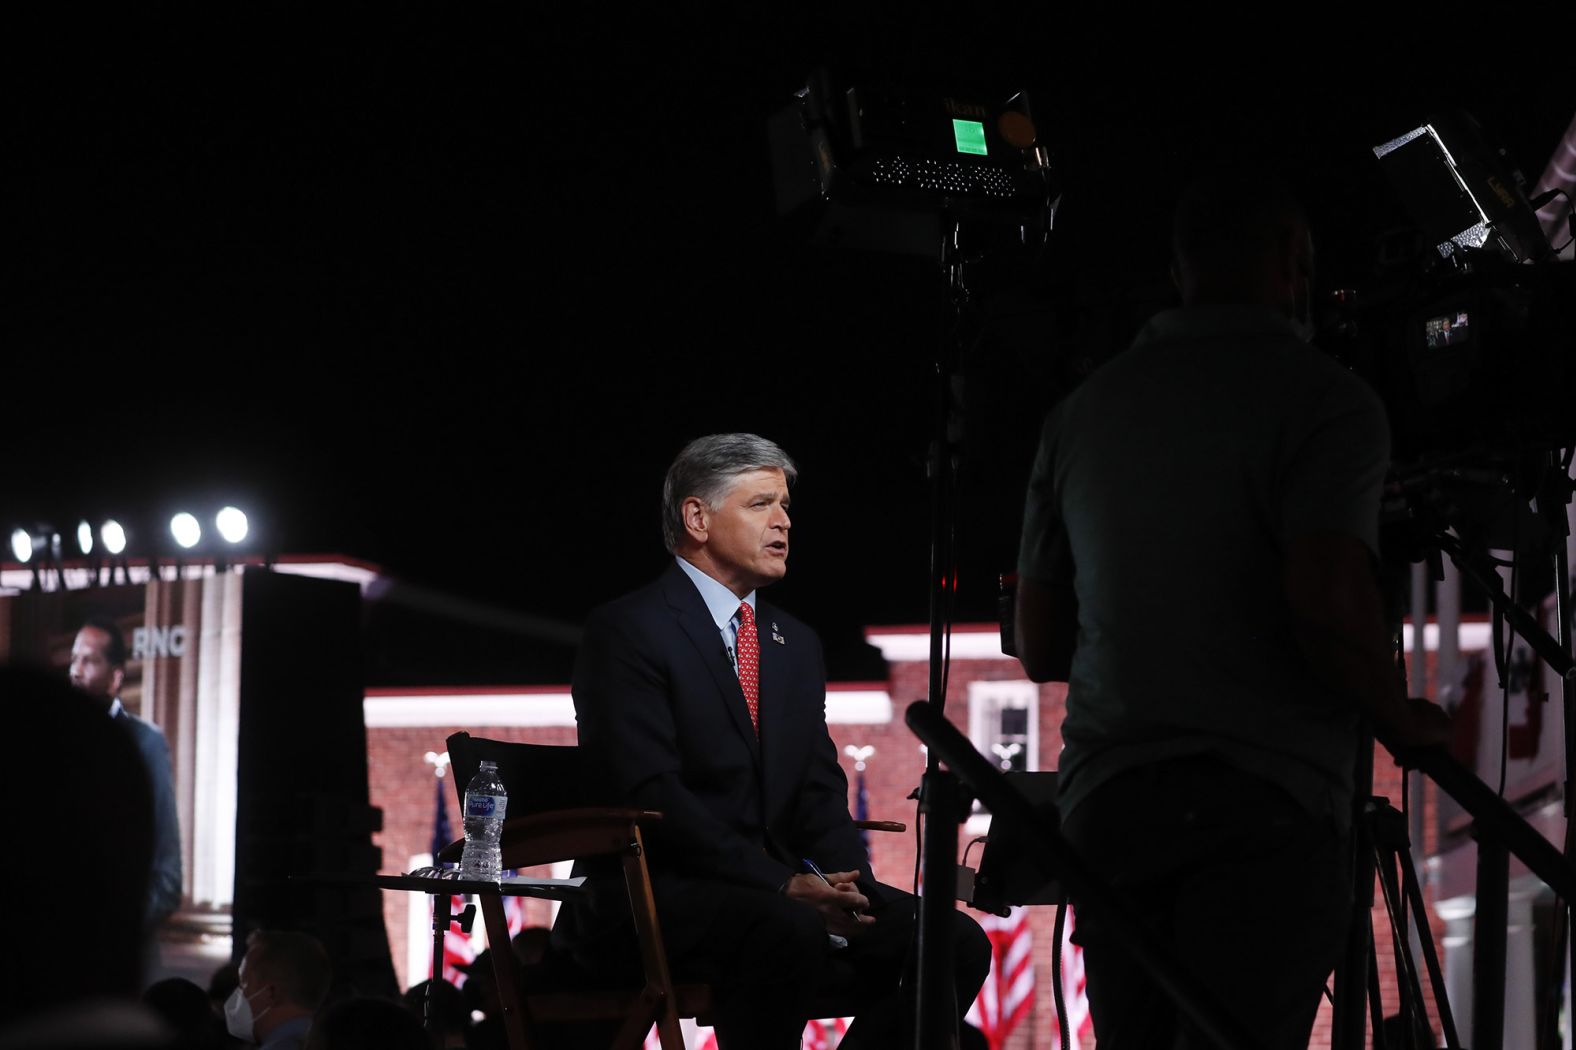 Fox News host Sean Hannity broadcasts live from Fort McHenry on Wednesday.